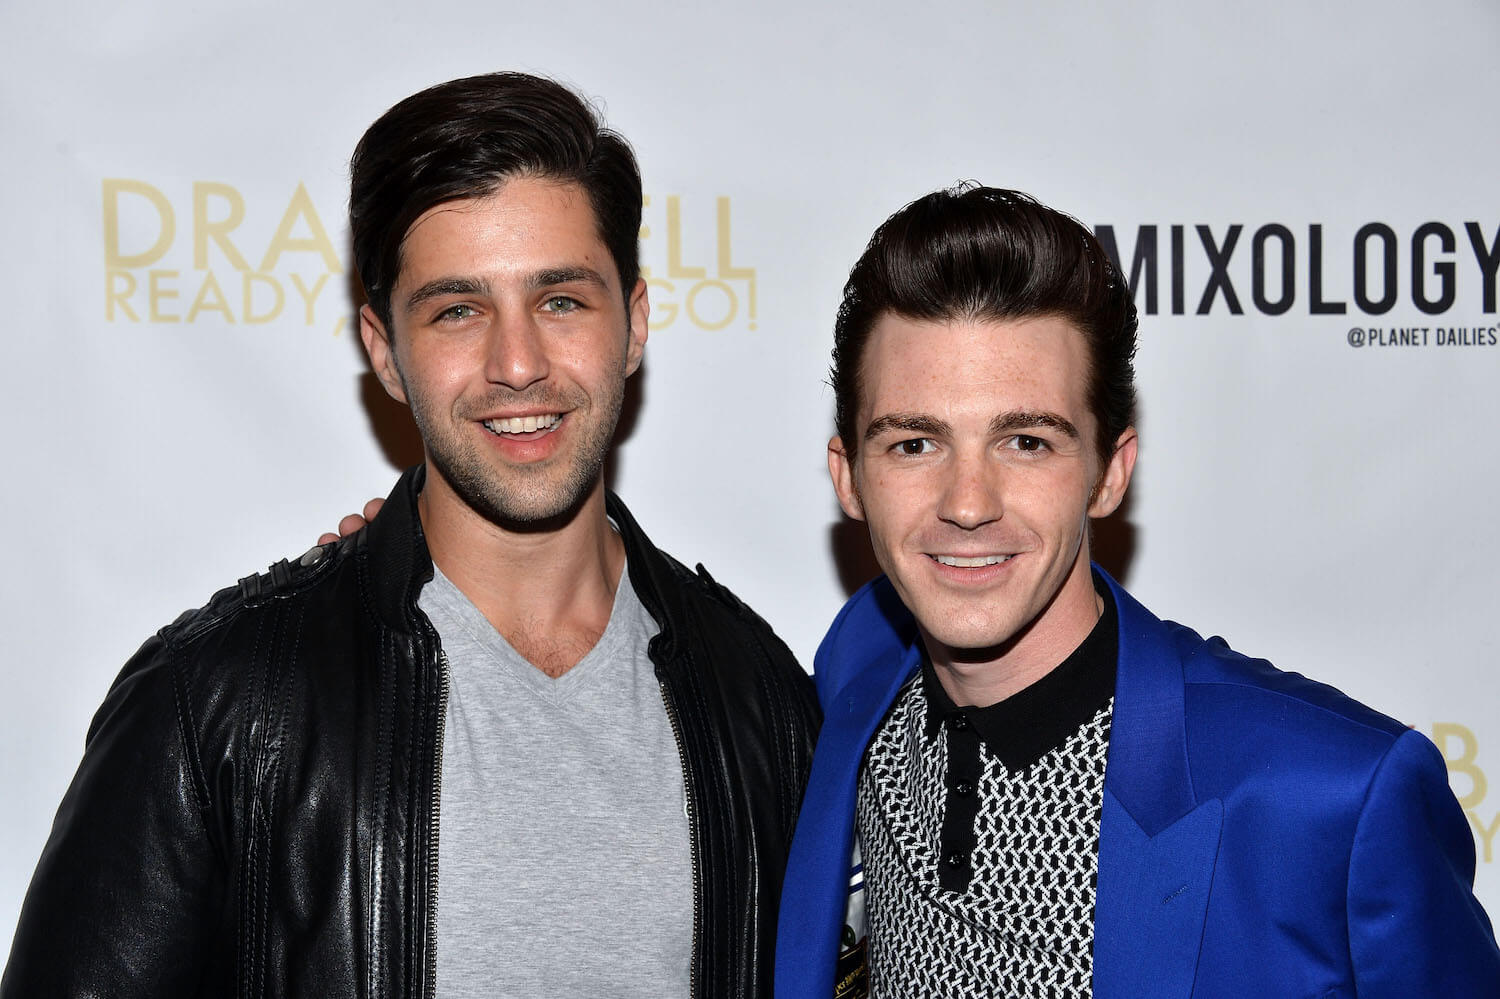 Nickelodeon's Josh Peck and Drake Bell in 2014